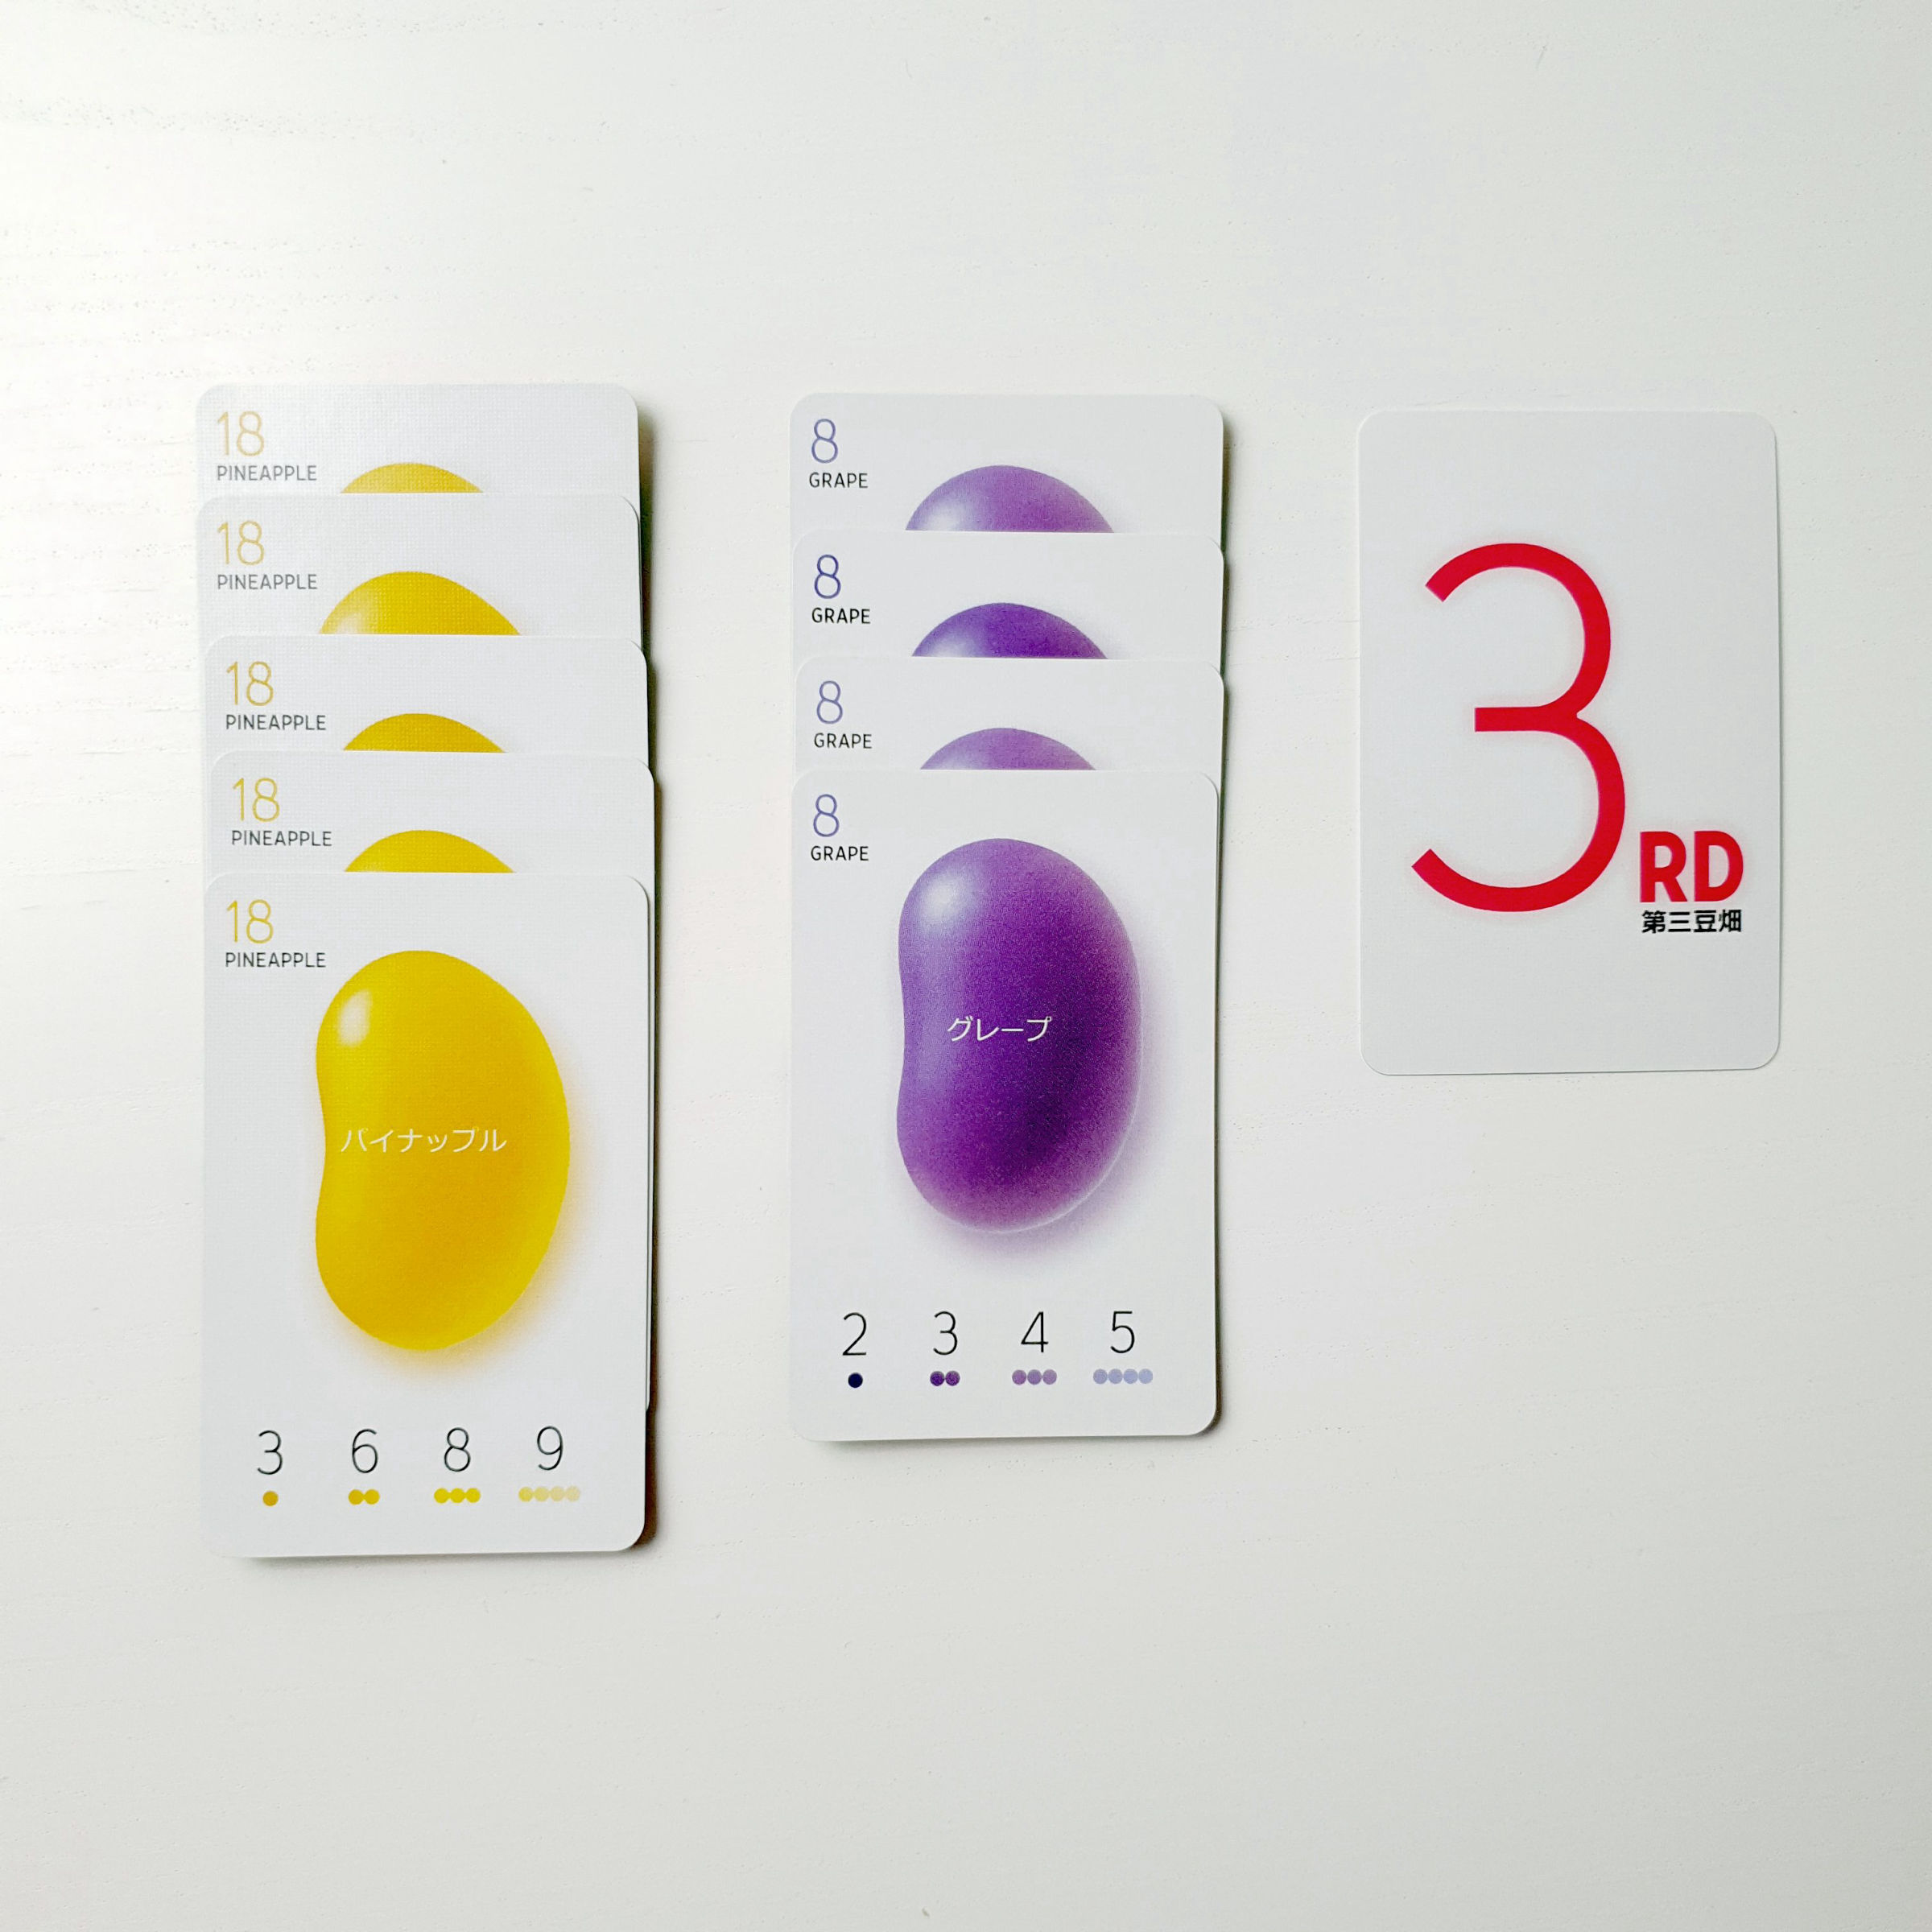 Example of one player's collected cards during play